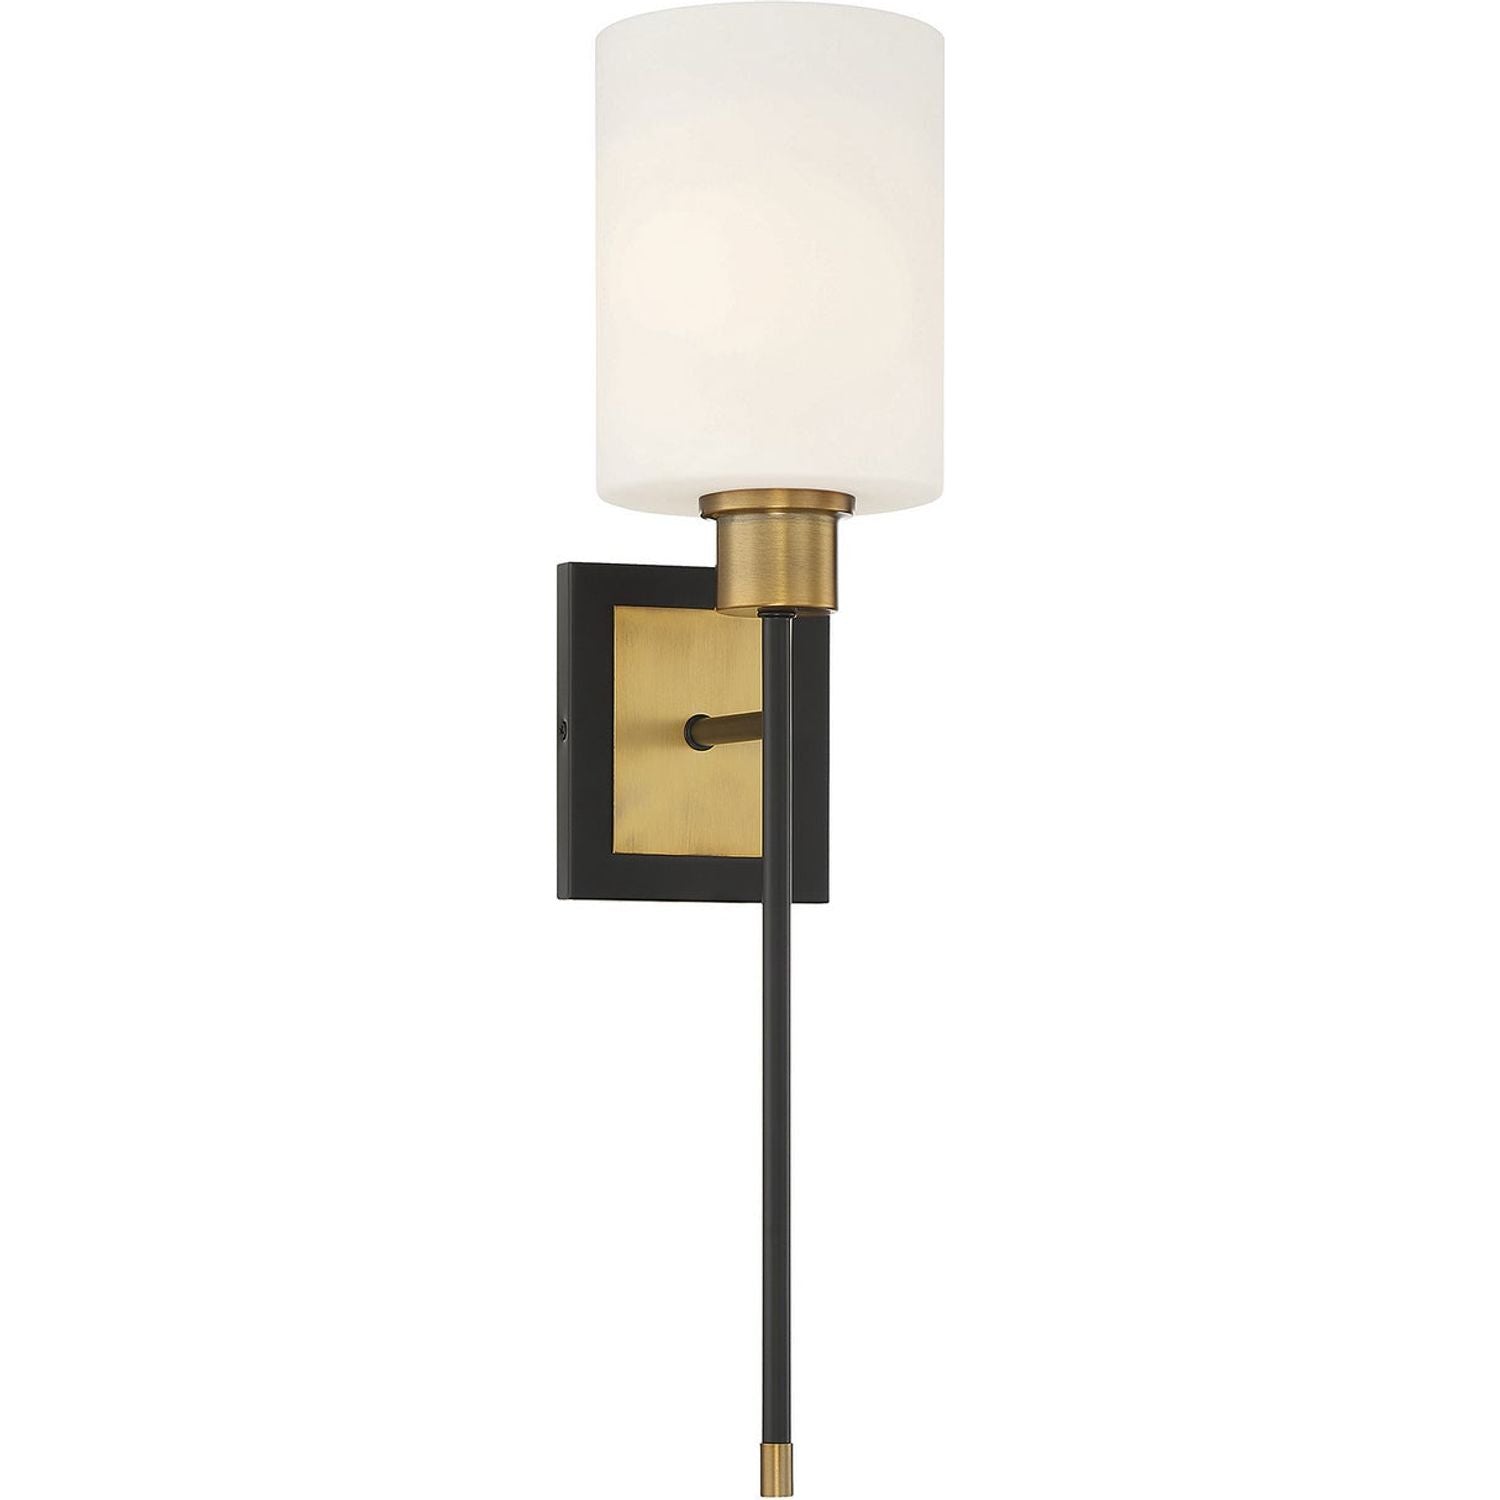 Savoy House - 9-1645-1-143 - One Light Wall Sconce - Alvara - Matte Black with Warm Brass Accents